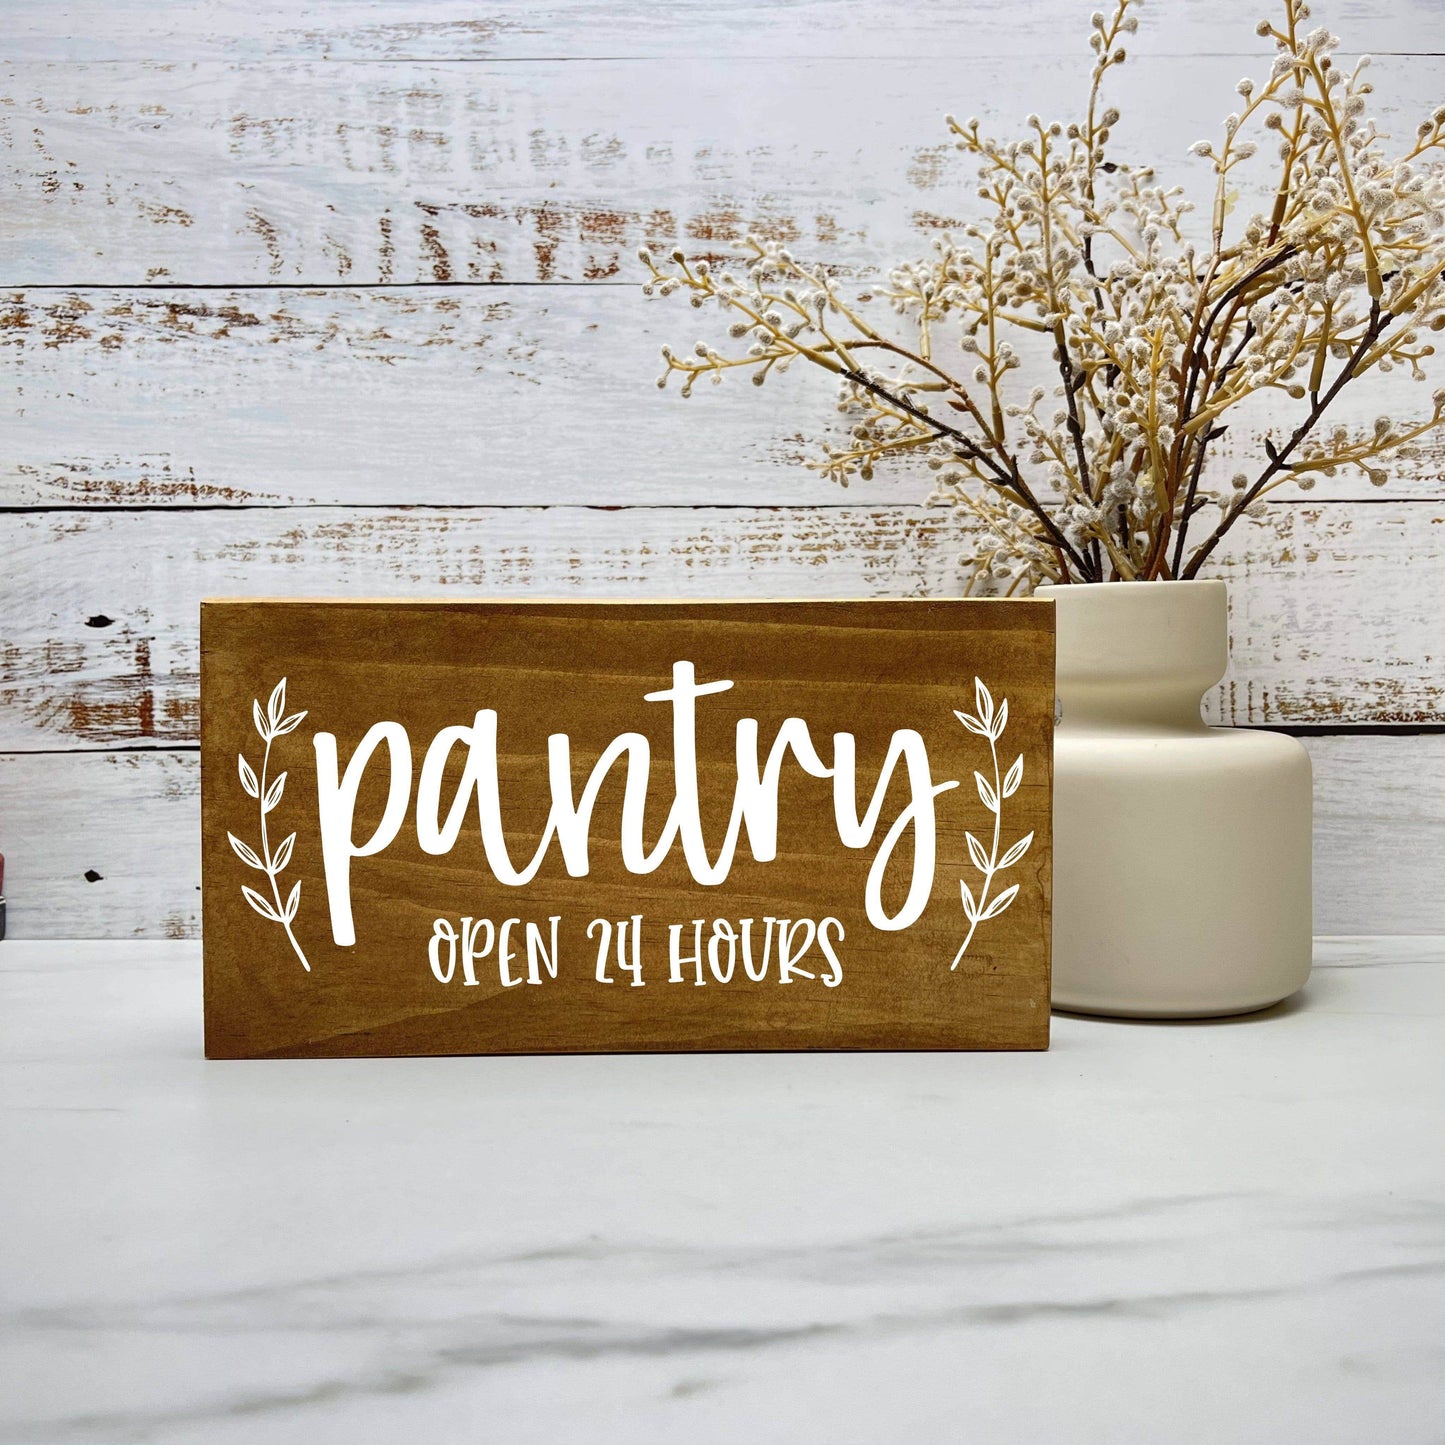 Pantry Open 24 Hours, kitchen wood sign, kitchen decor, home decor